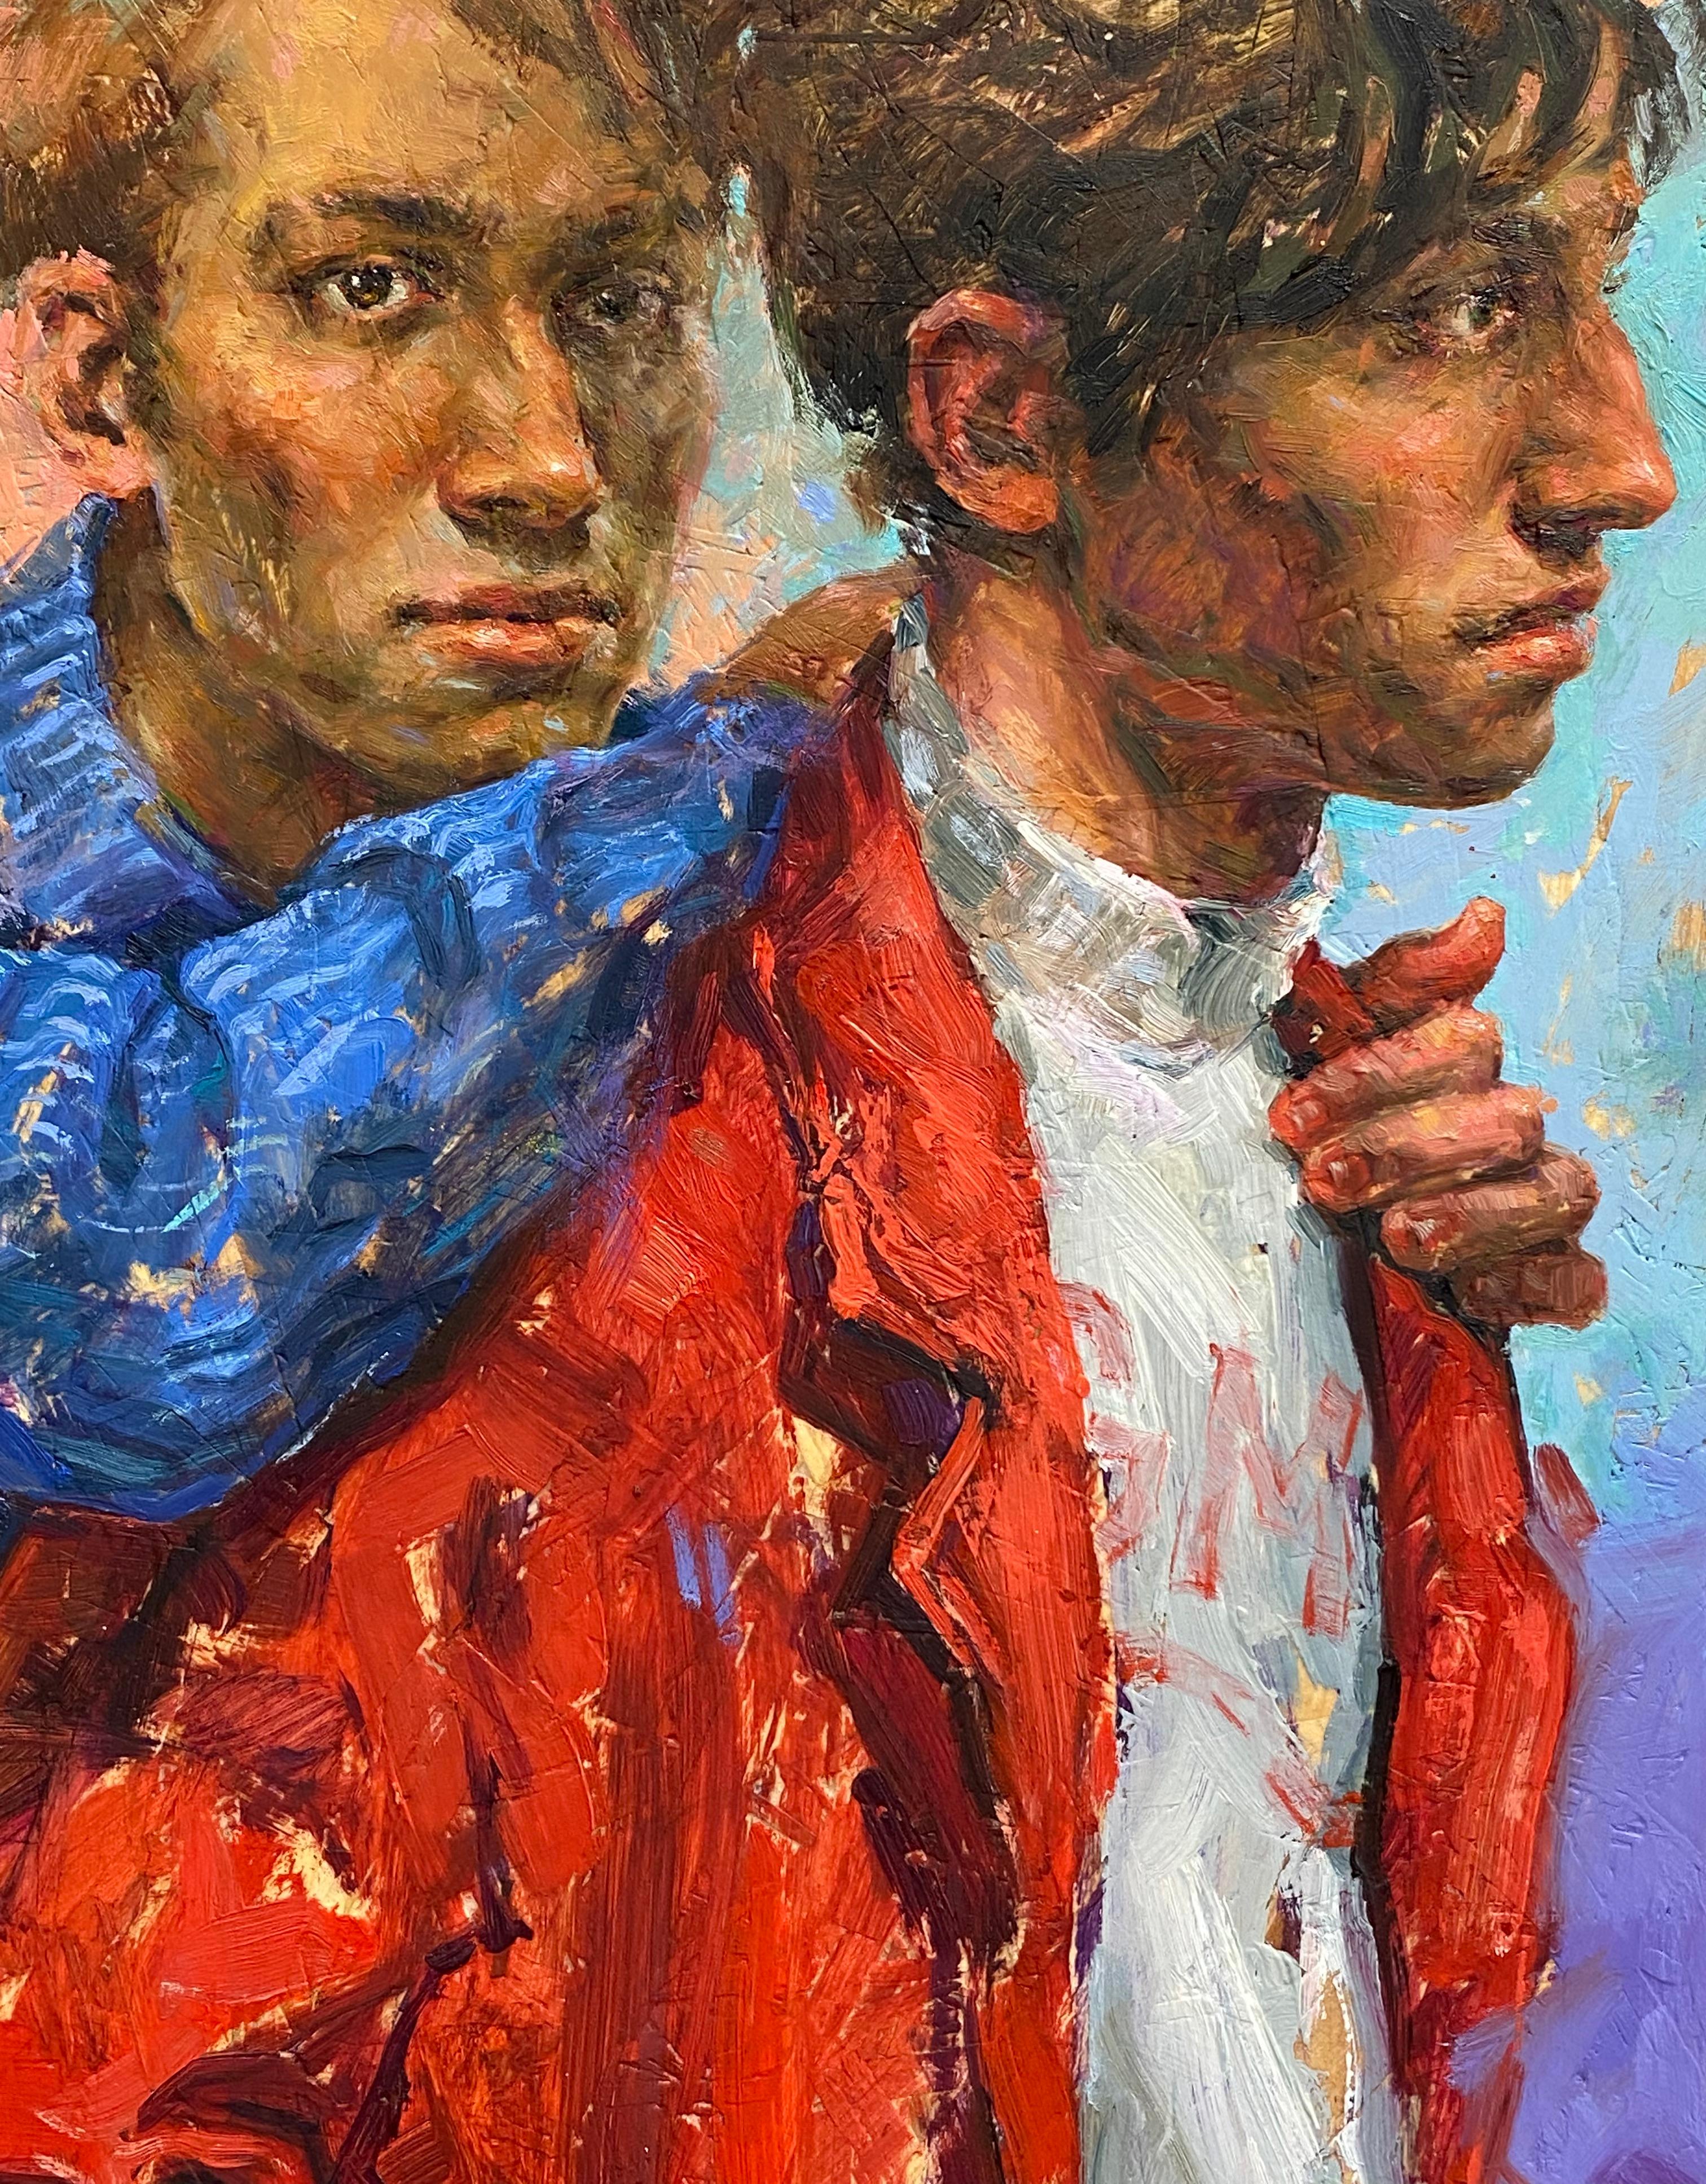 Tania Rivilis
Unspoken
63 x 45 cm 
Oil on wood panel

First we can announce some wonderful news! 3 May 2022 Tania Rivilis did win the first price of the Royal Academy of Portraitpainters in the UK.

Tania Rivilis (b. 1986)  
Tania Rivilis began